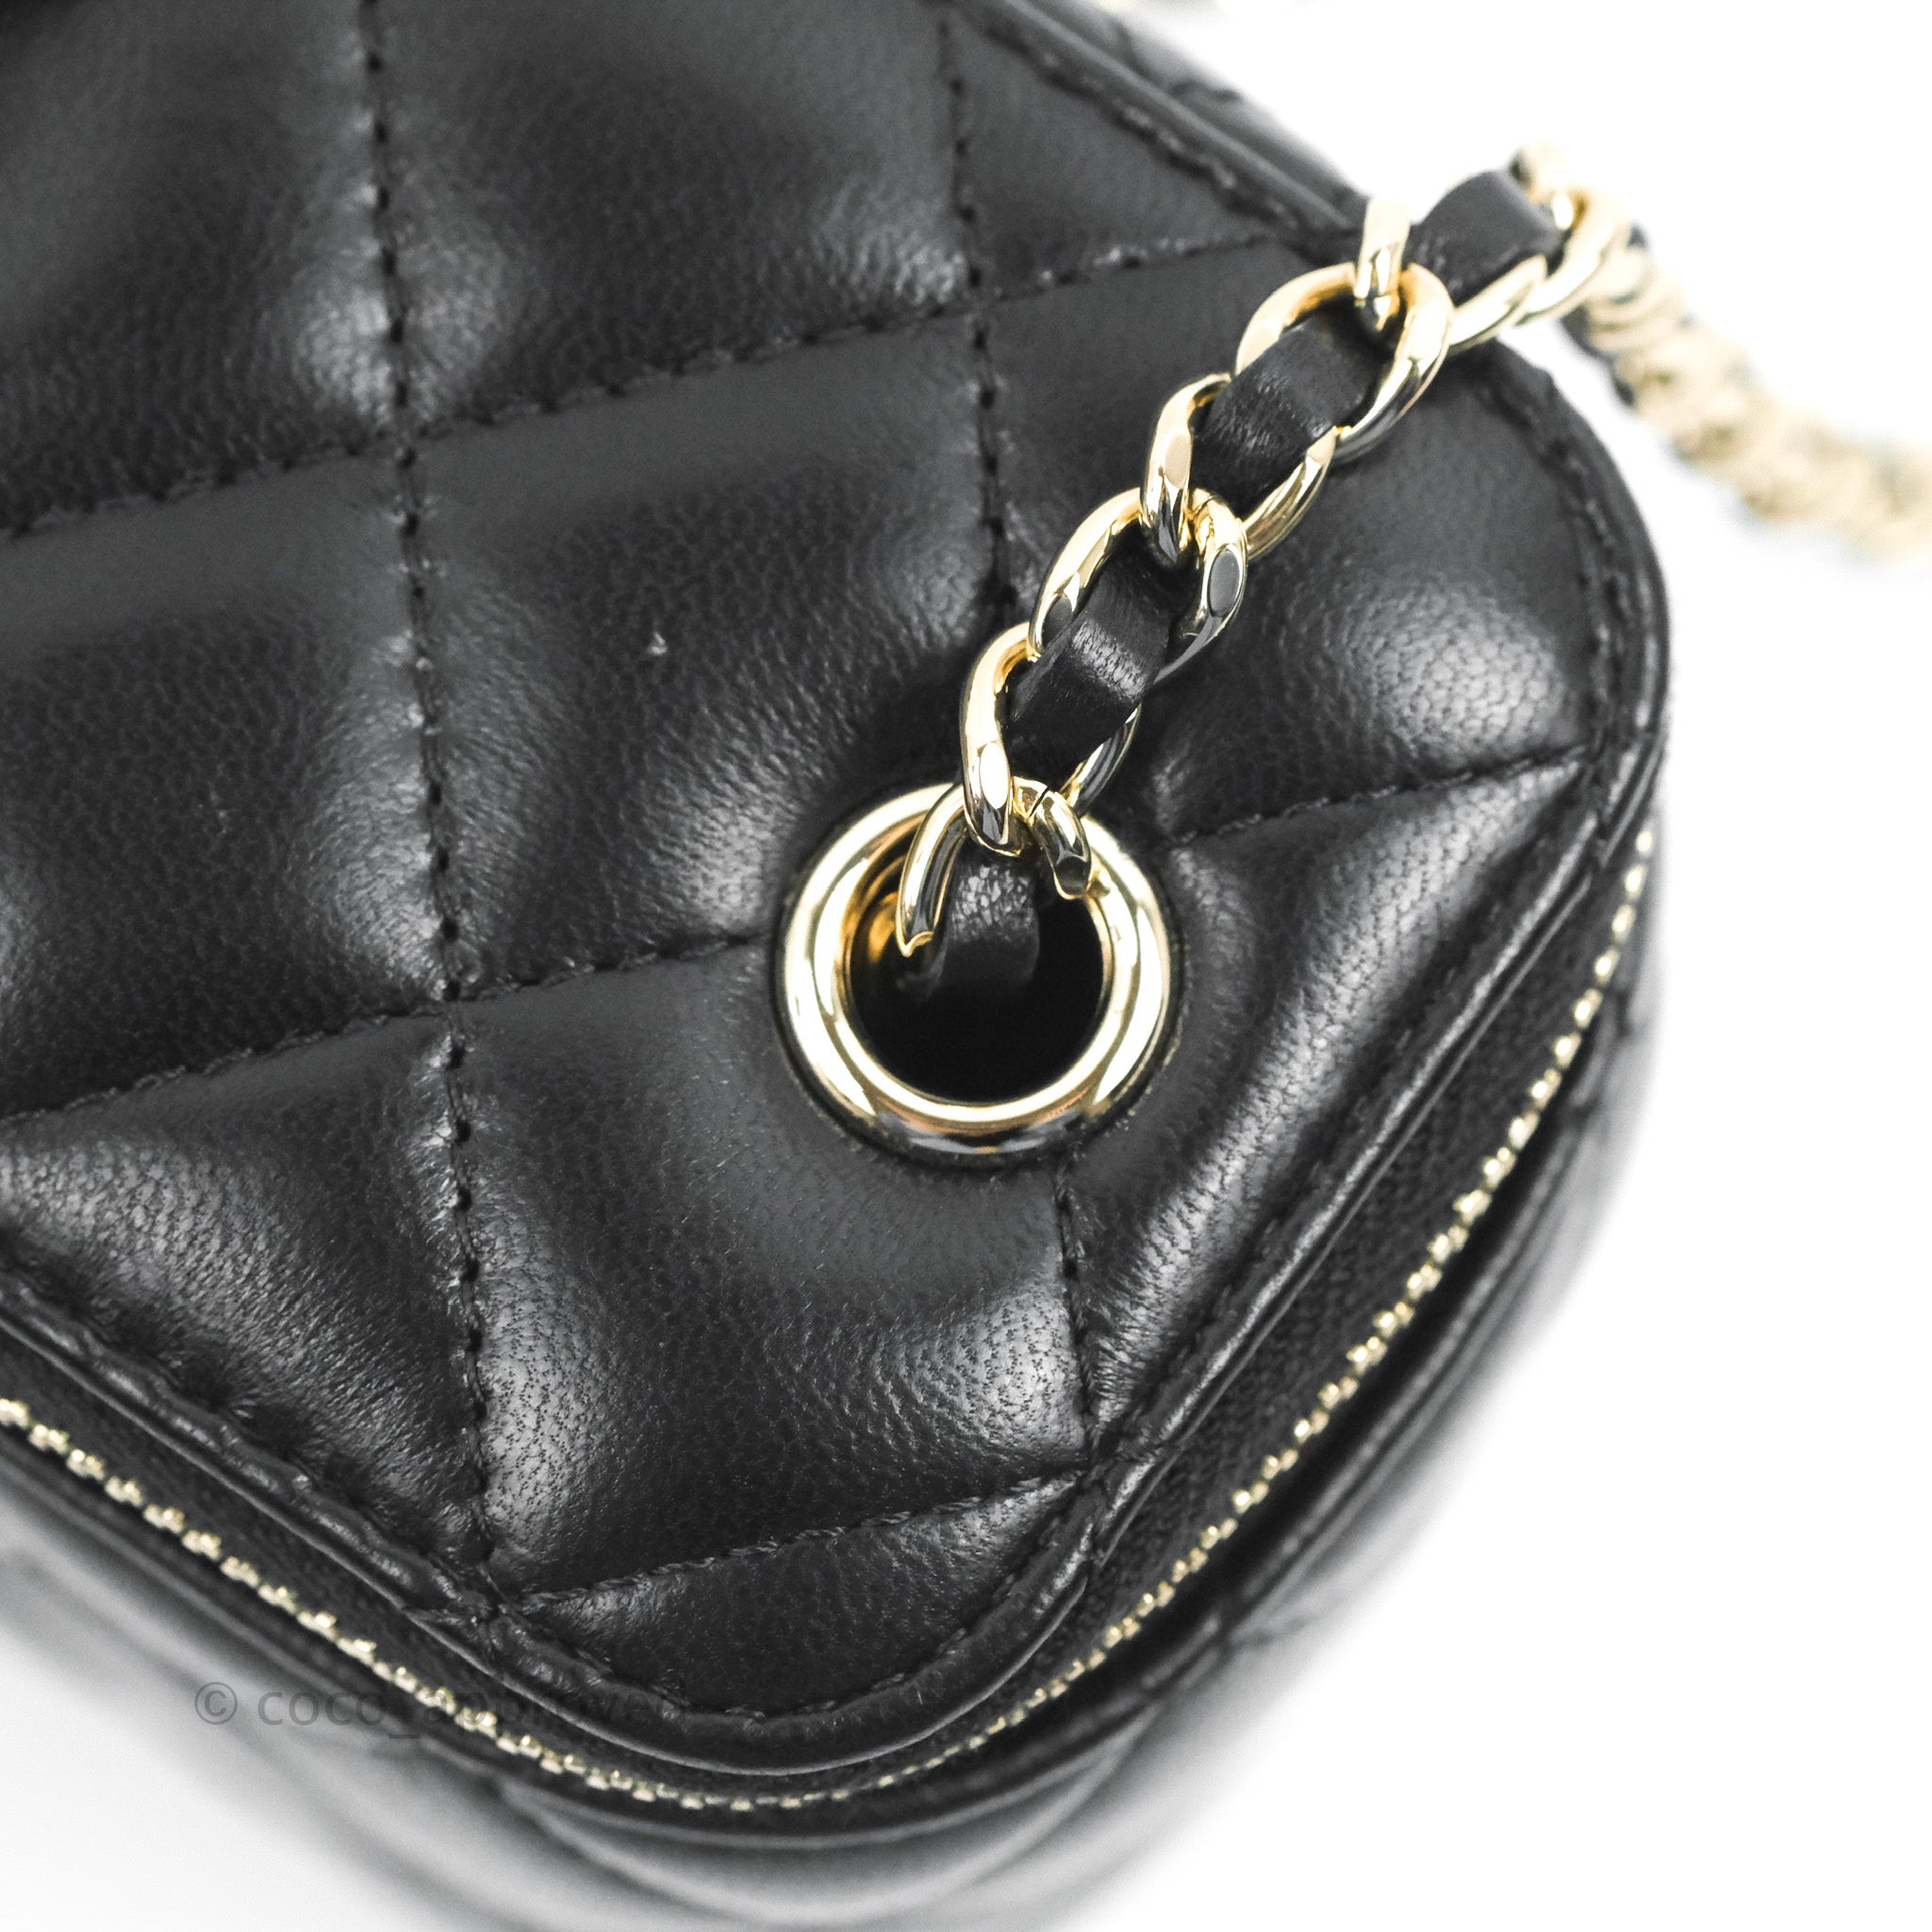 Chanel Quilted Mini Golden Plate Vanity Case With Chain Black Lambskin –  Coco Approved Studio